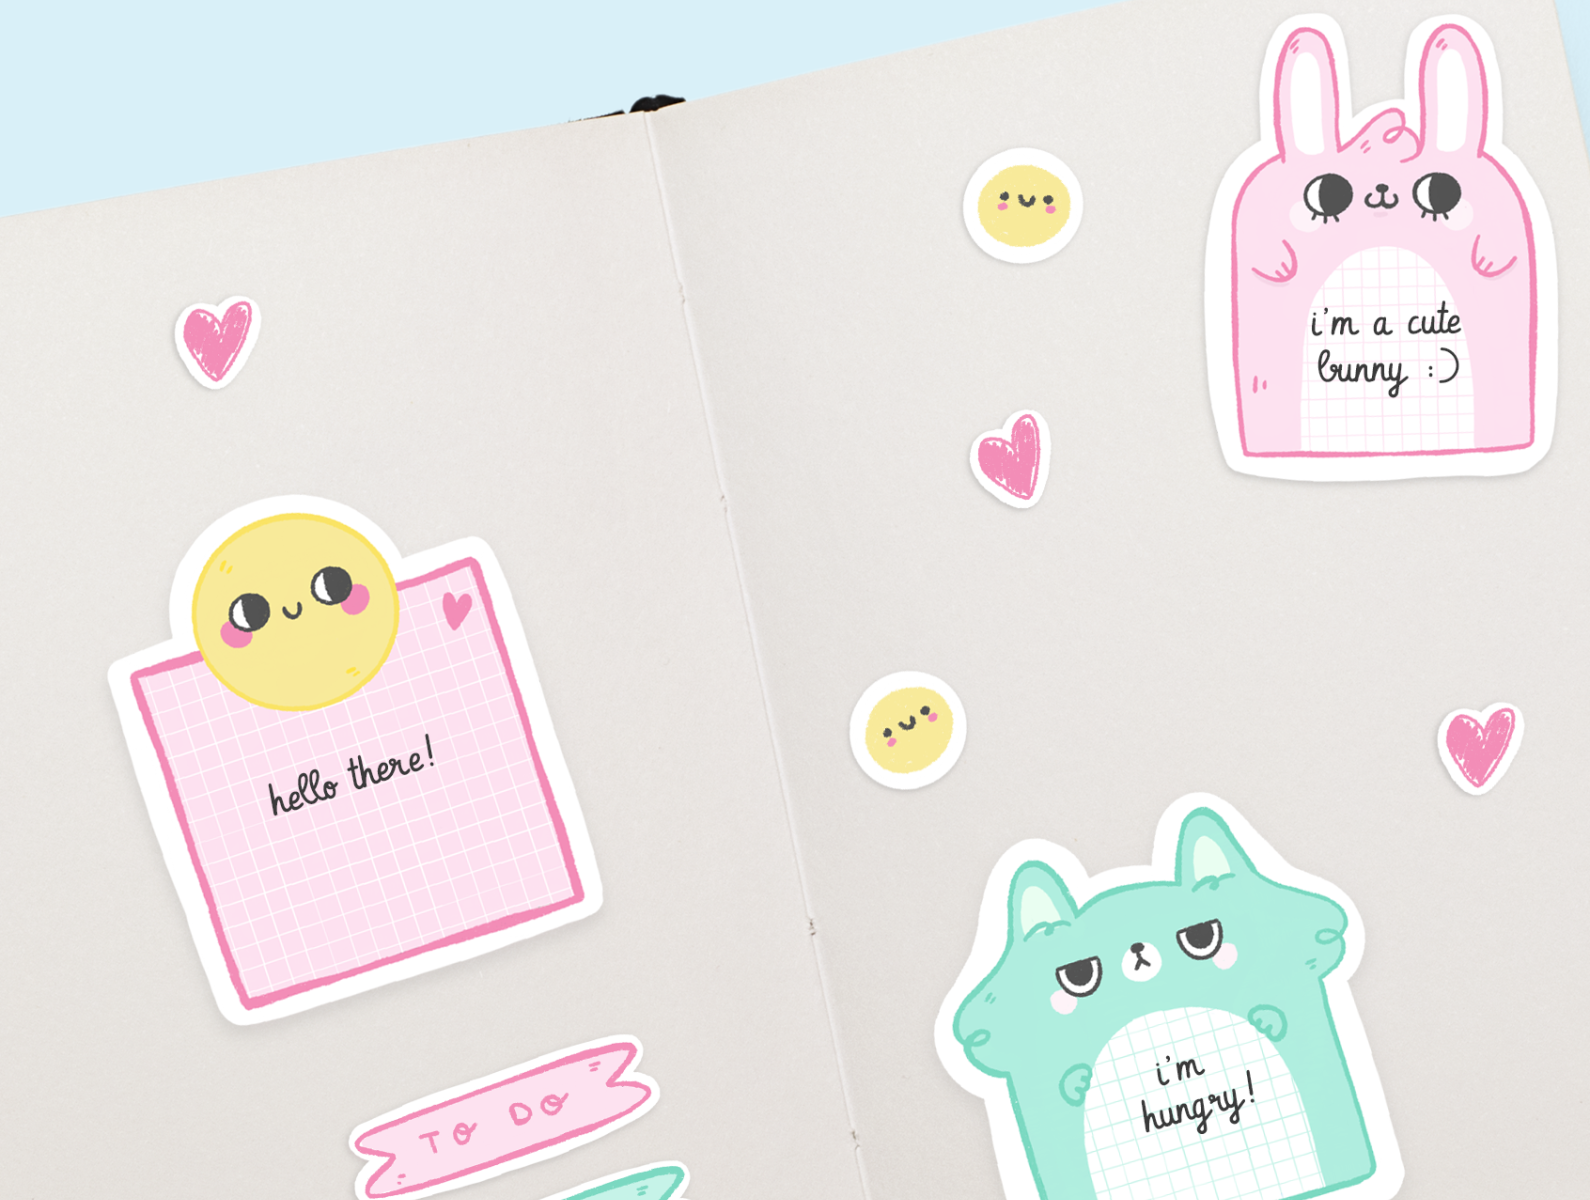 Sticky Notes Free Printable by Cristina Quero on Dribbble